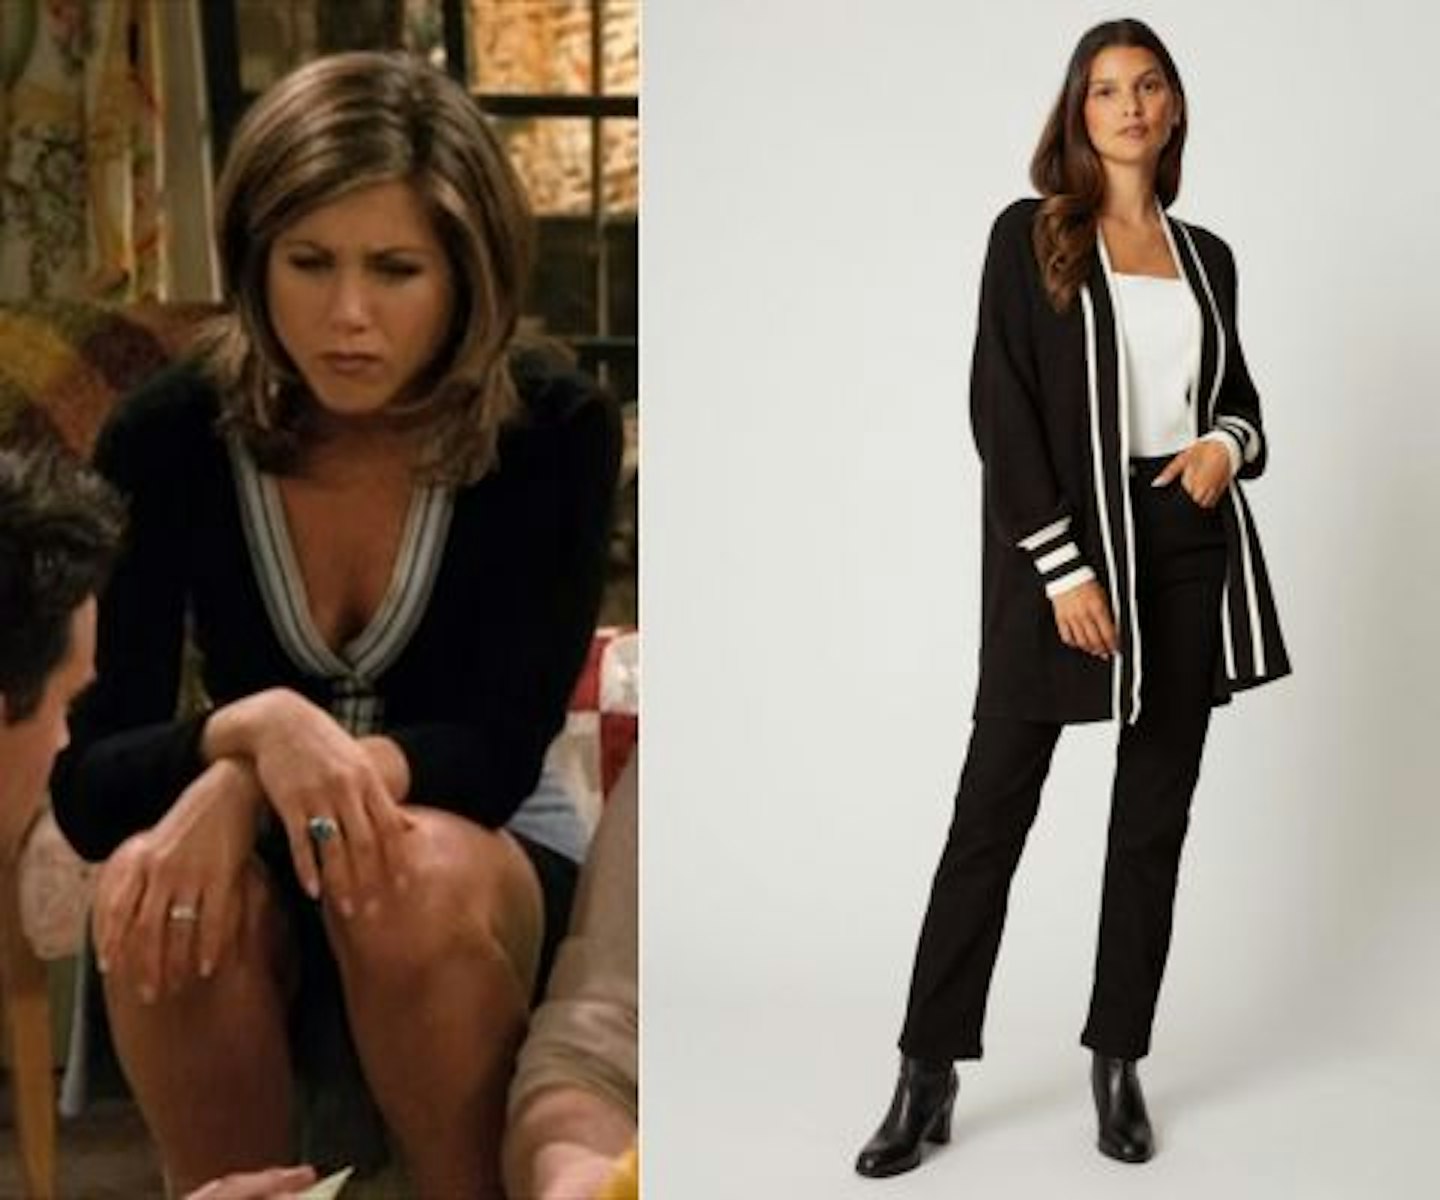 PrettyLittleThing have recreated the iconic Rachel Green dress for